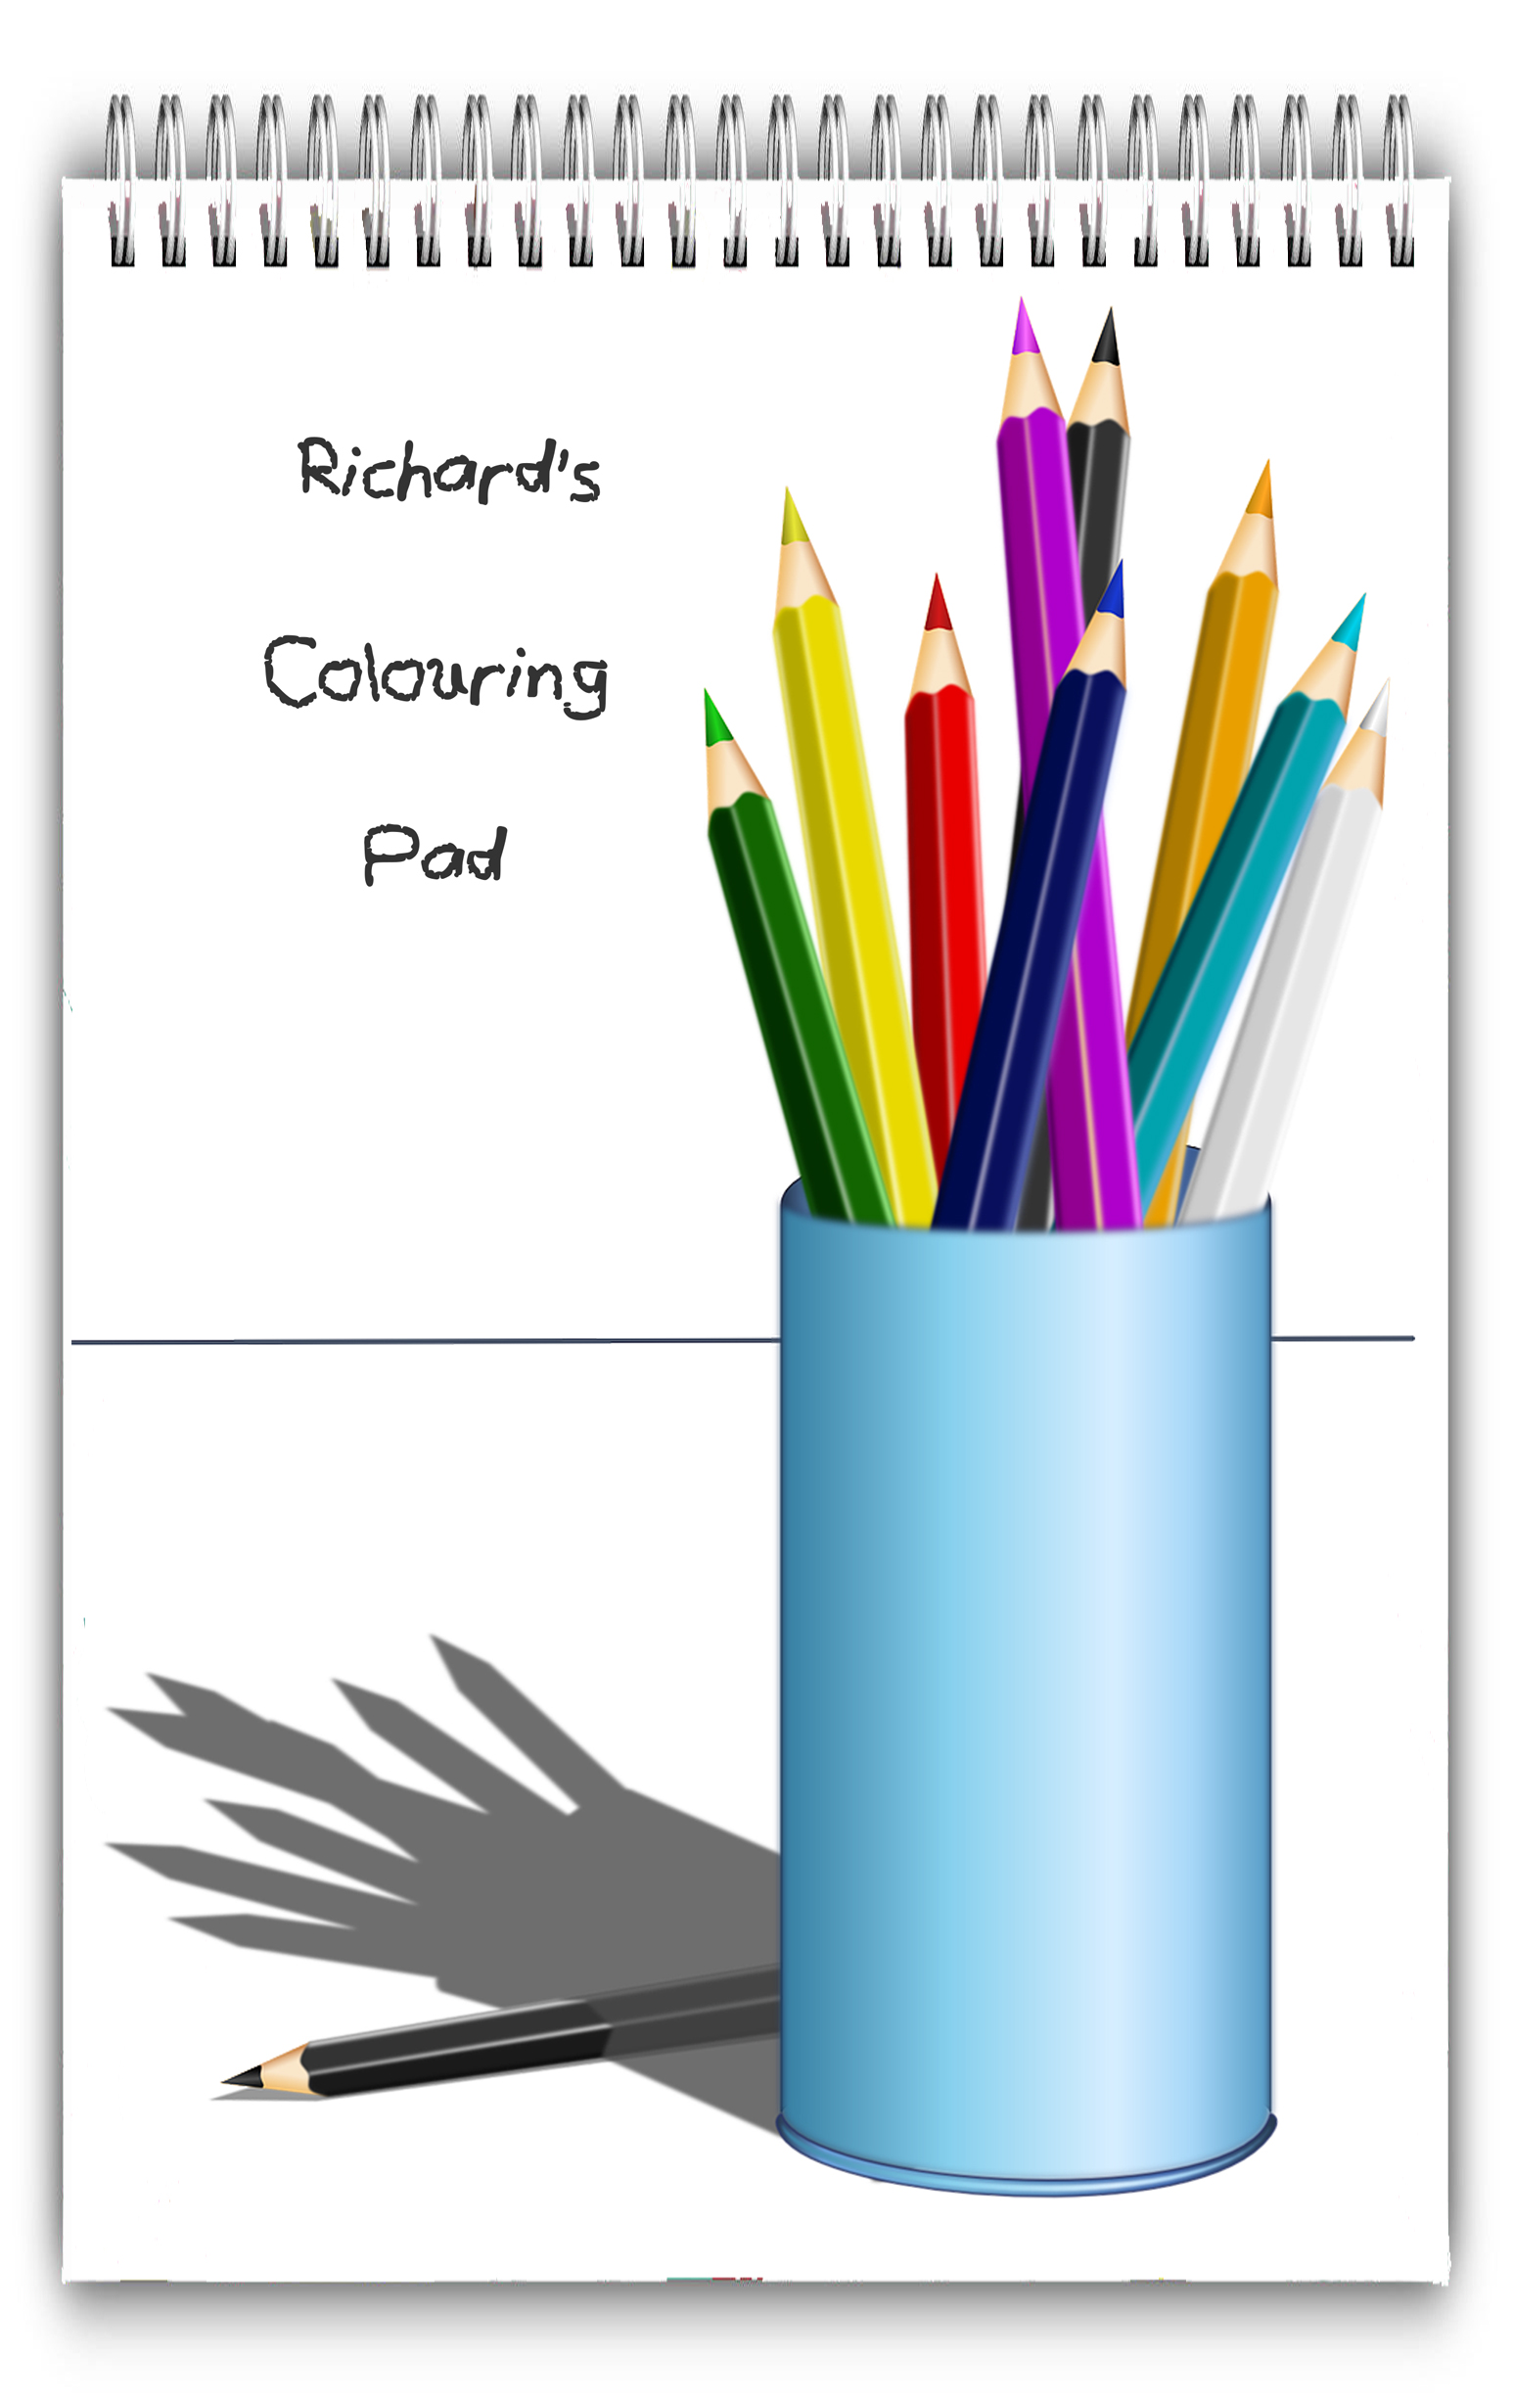 https://www.bootifulbooks.co.uk/wp-content/uploads/2020/09/EBAY-A4-PENCIL-COLOURING-PAD-PERSONALISED.jpg